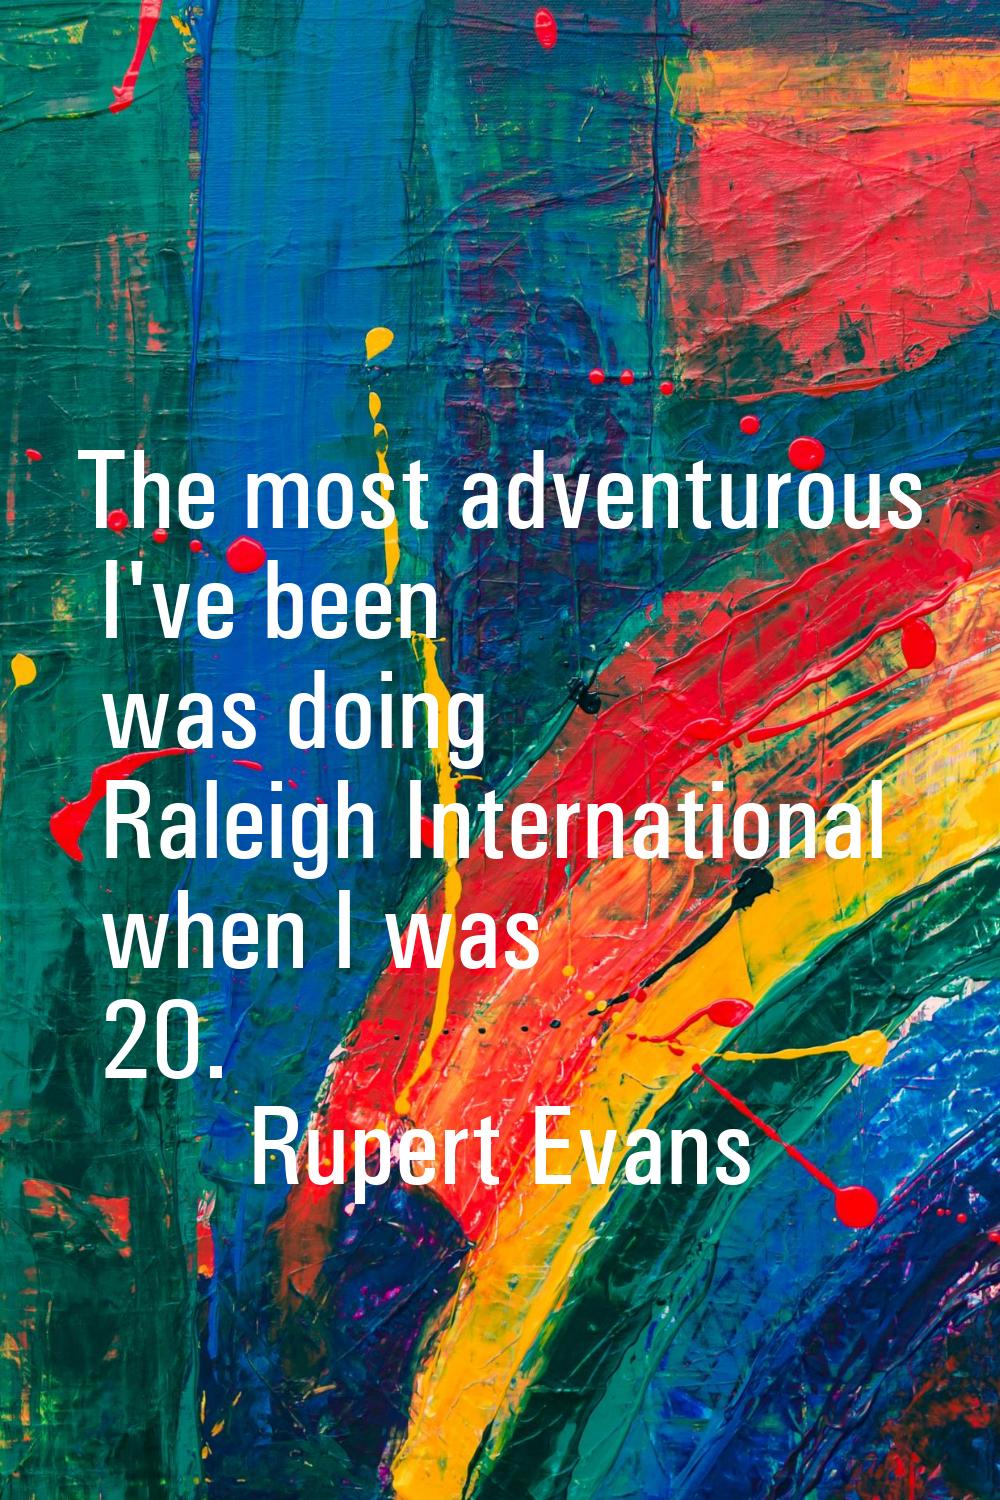 The most adventurous I've been was doing Raleigh International when I was 20.